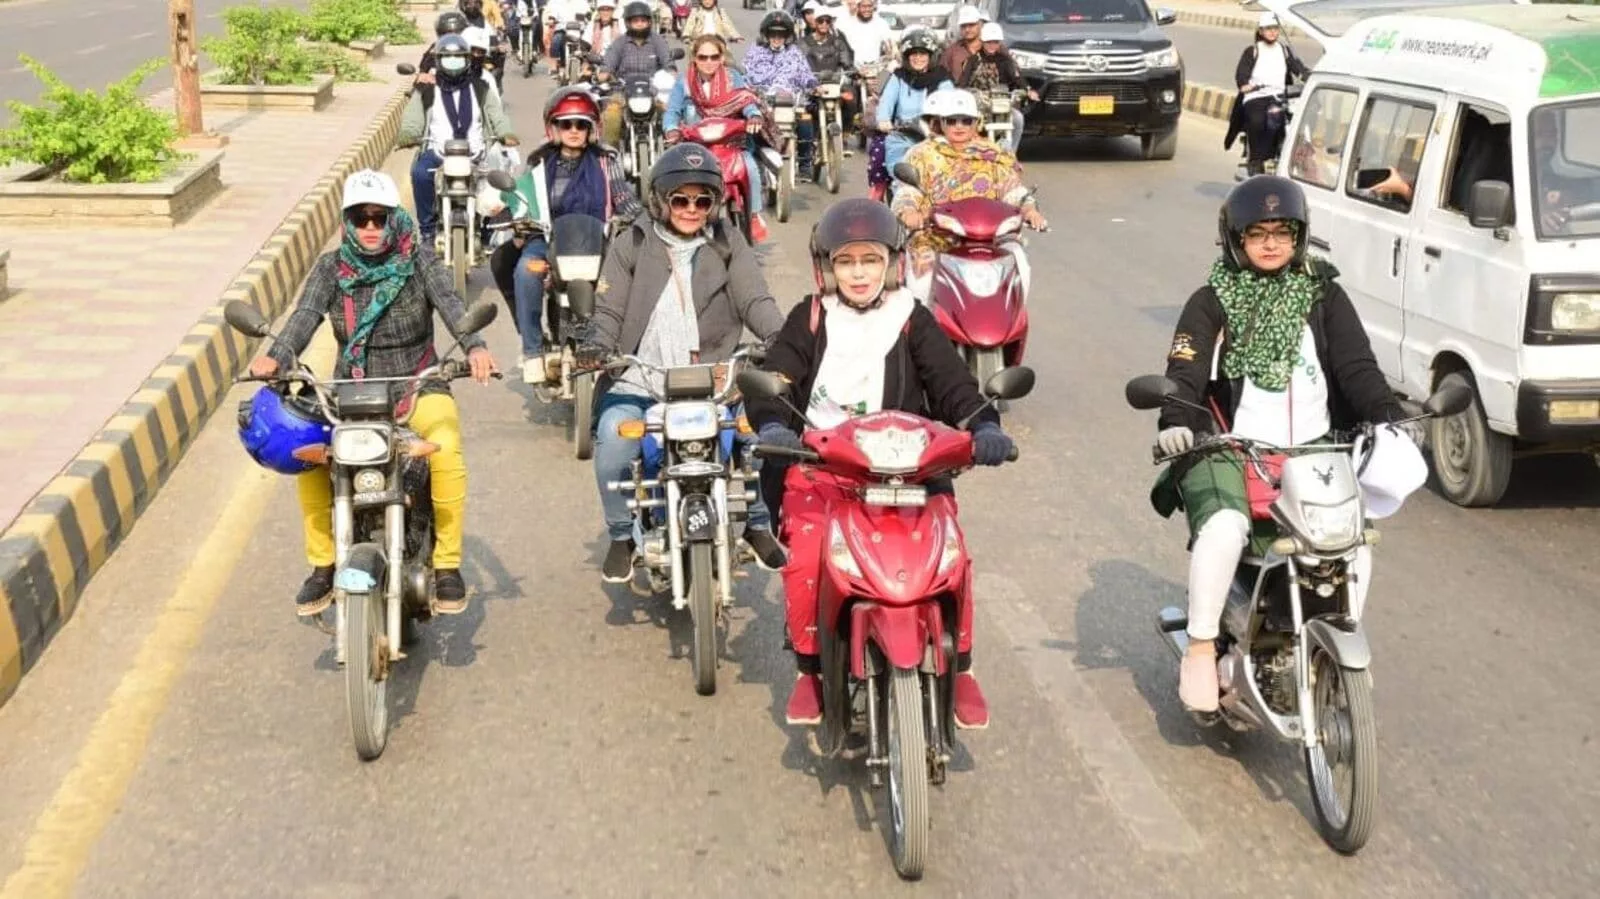 Women's Day: Pakistan's women 'Rowdy Riders' take on traffic and tradition